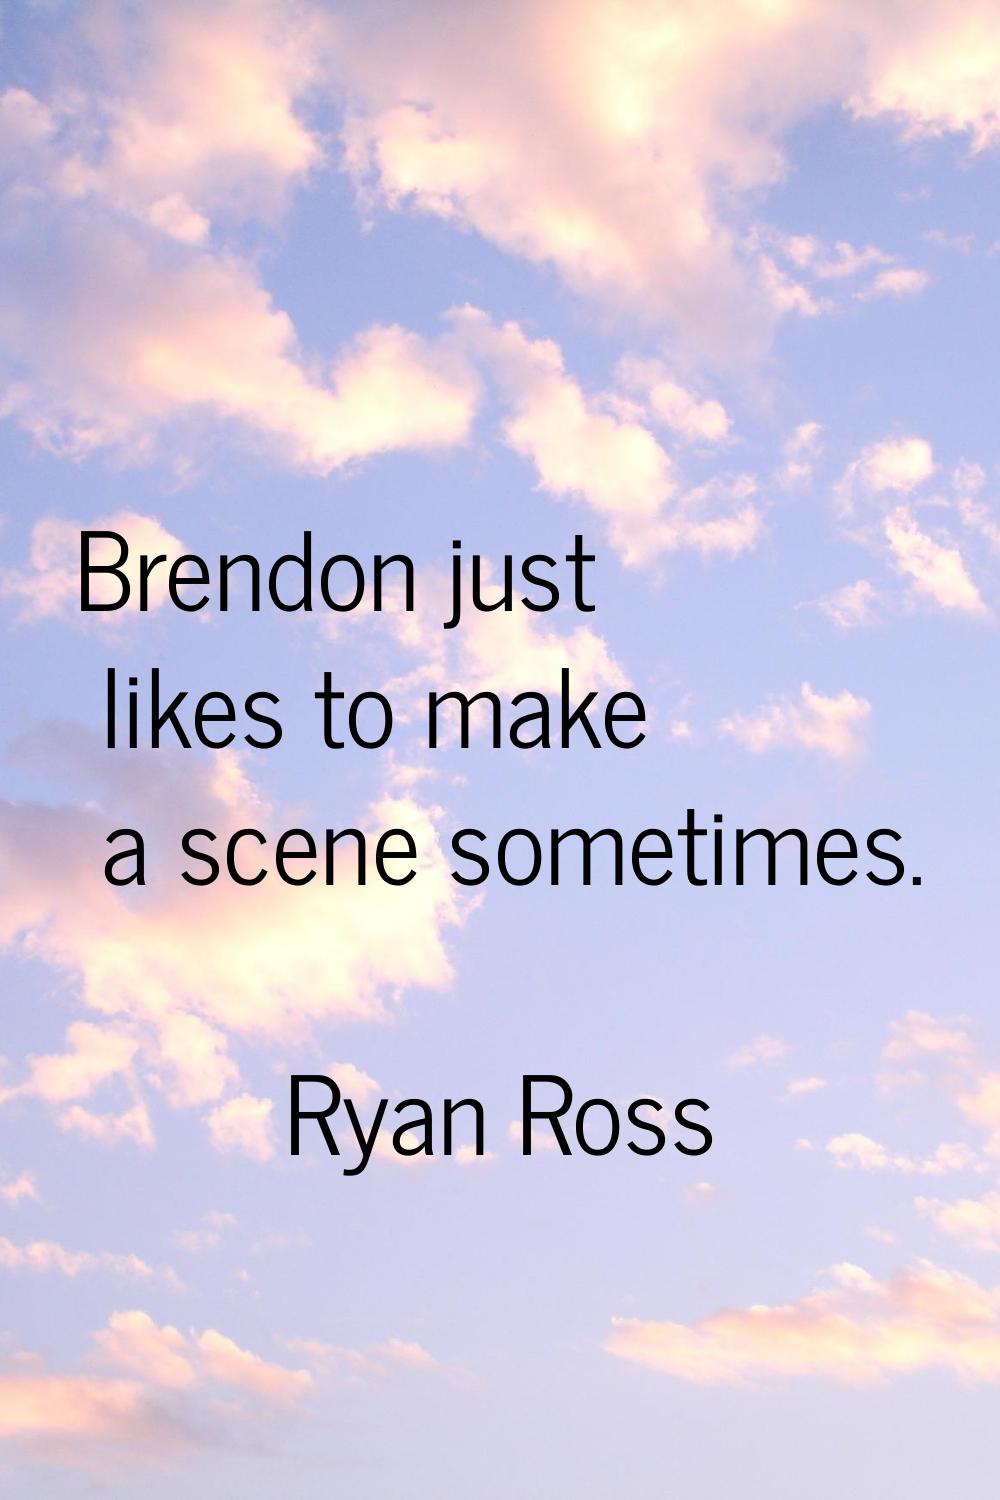 Brendon just likes to make a scene sometimes.